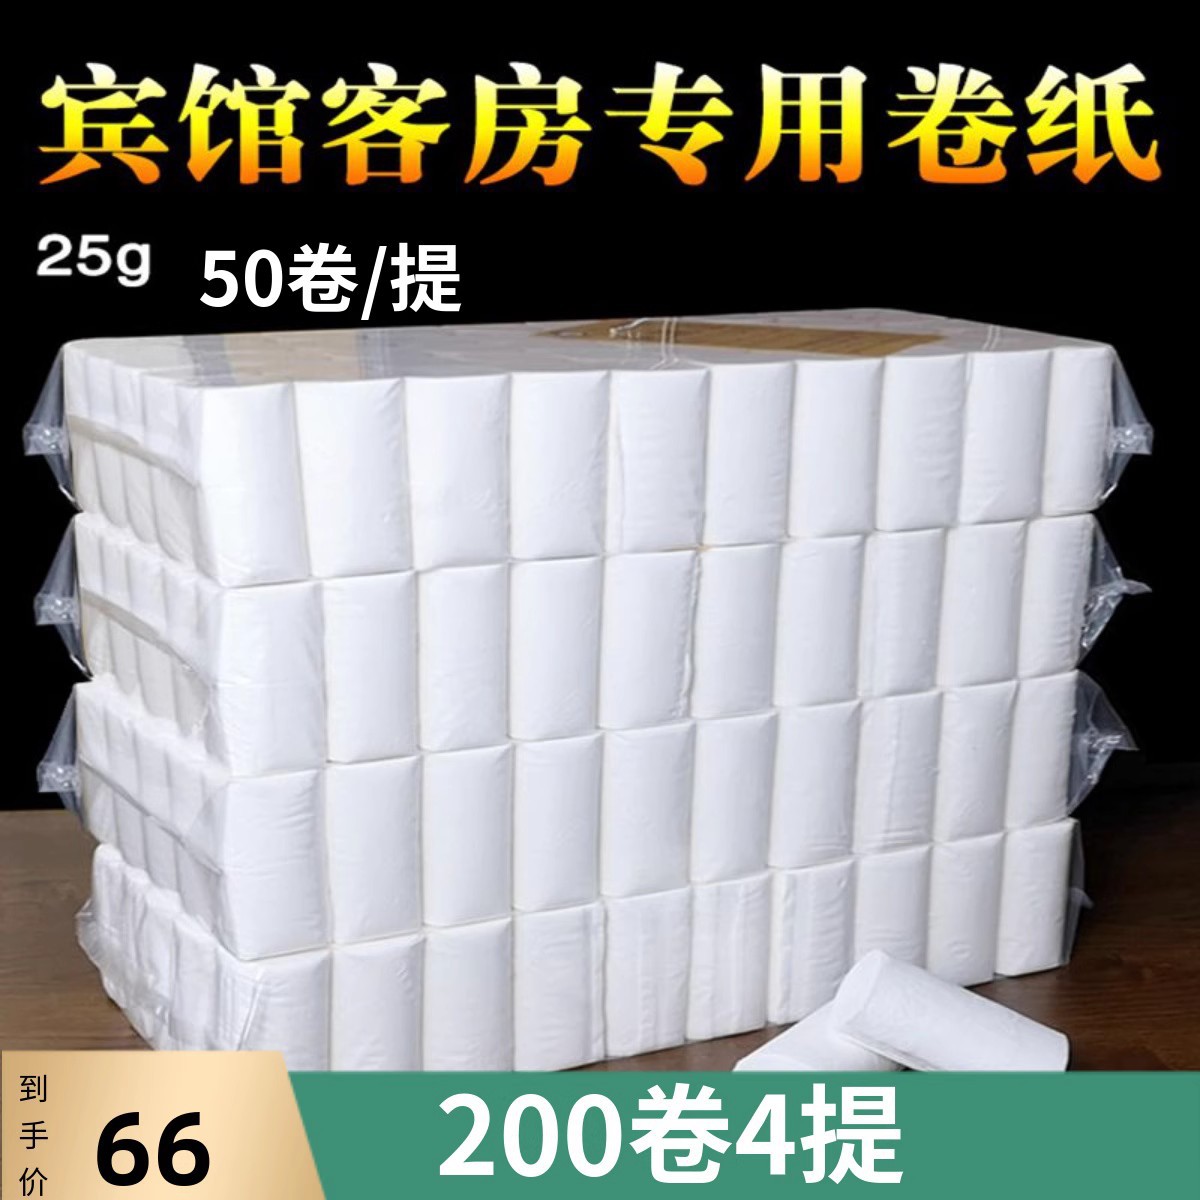 Special small roll paper for hotels, hot...